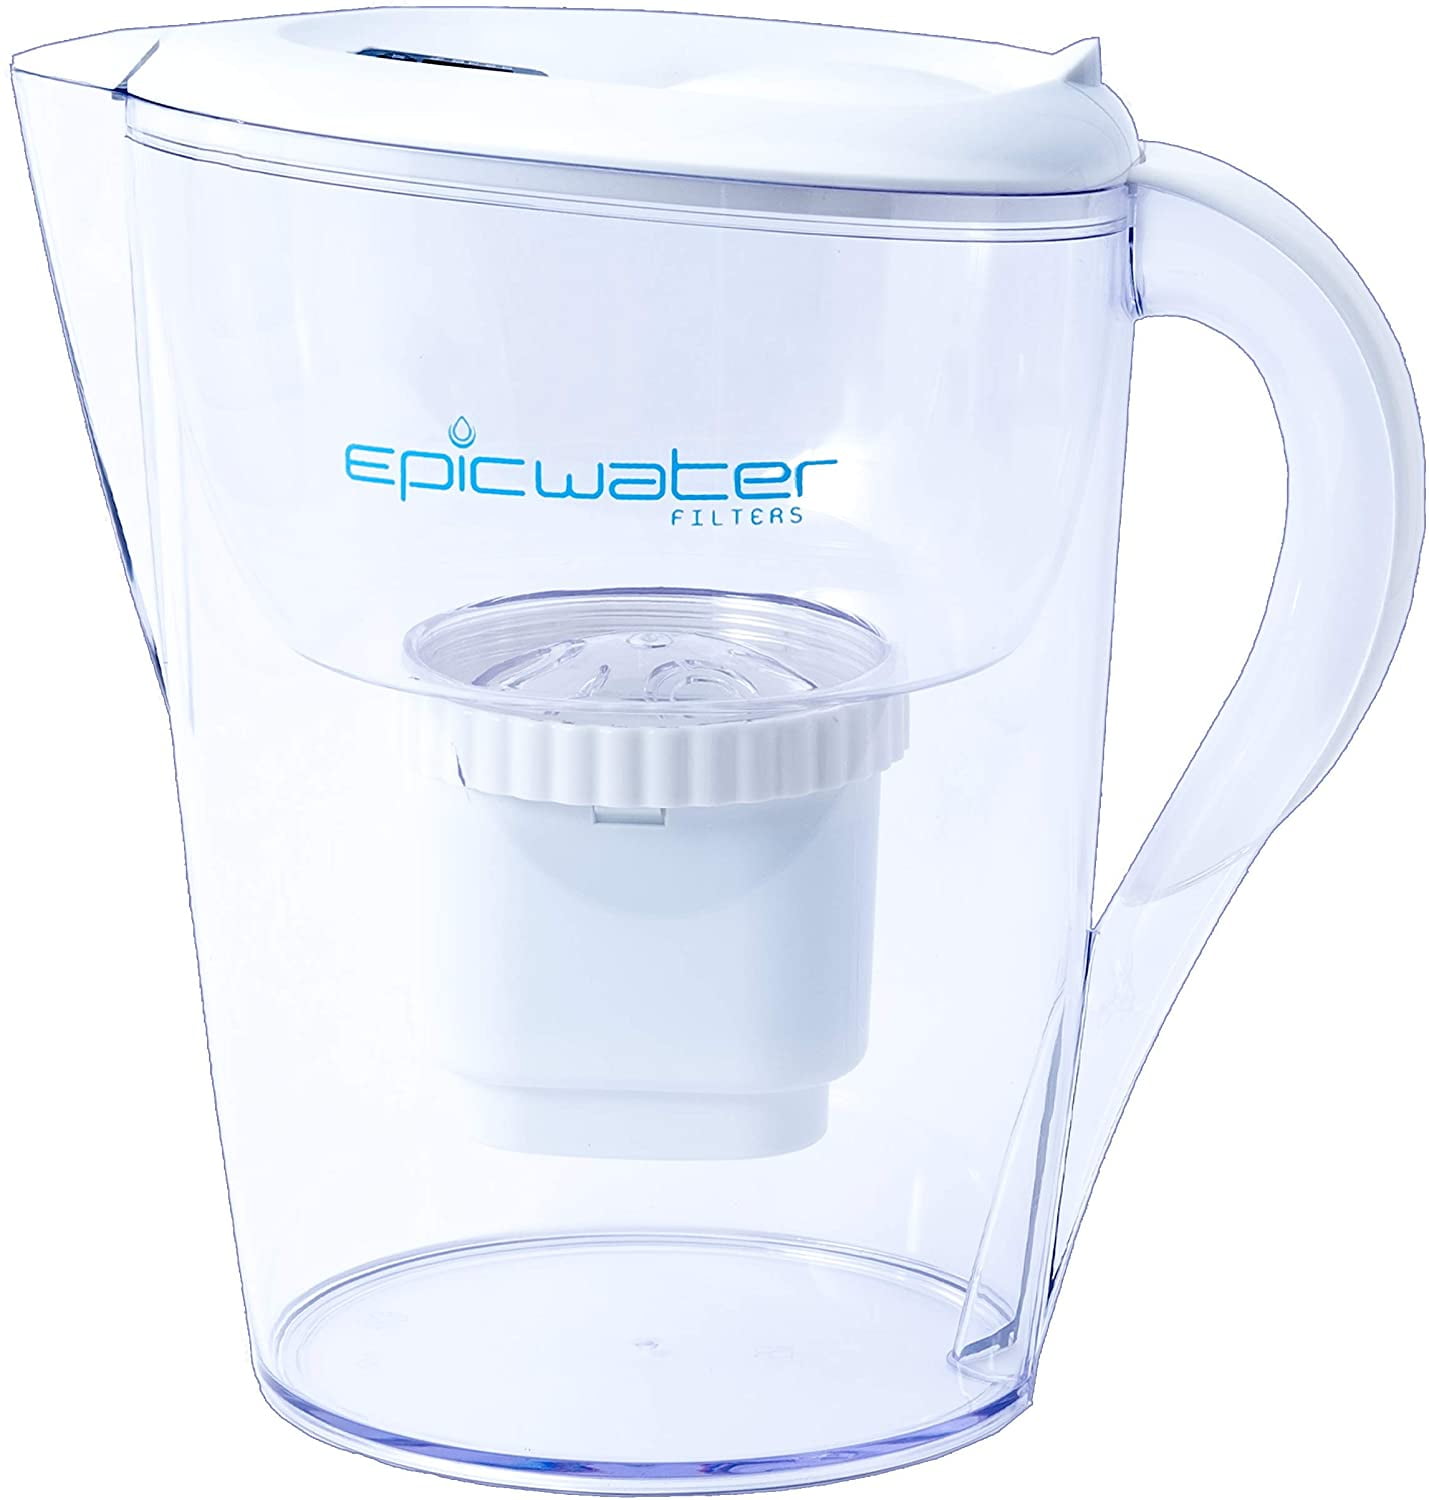 Removes Chlorine and Heavy Metals—Improves Taste—Holds 3.5 Liters Reshape Water 10-Cup Pitcher with Long-Lasting Filter—Ranked a 2019 Best Water Filter Pitcher by Family Living Today—Increases Ph